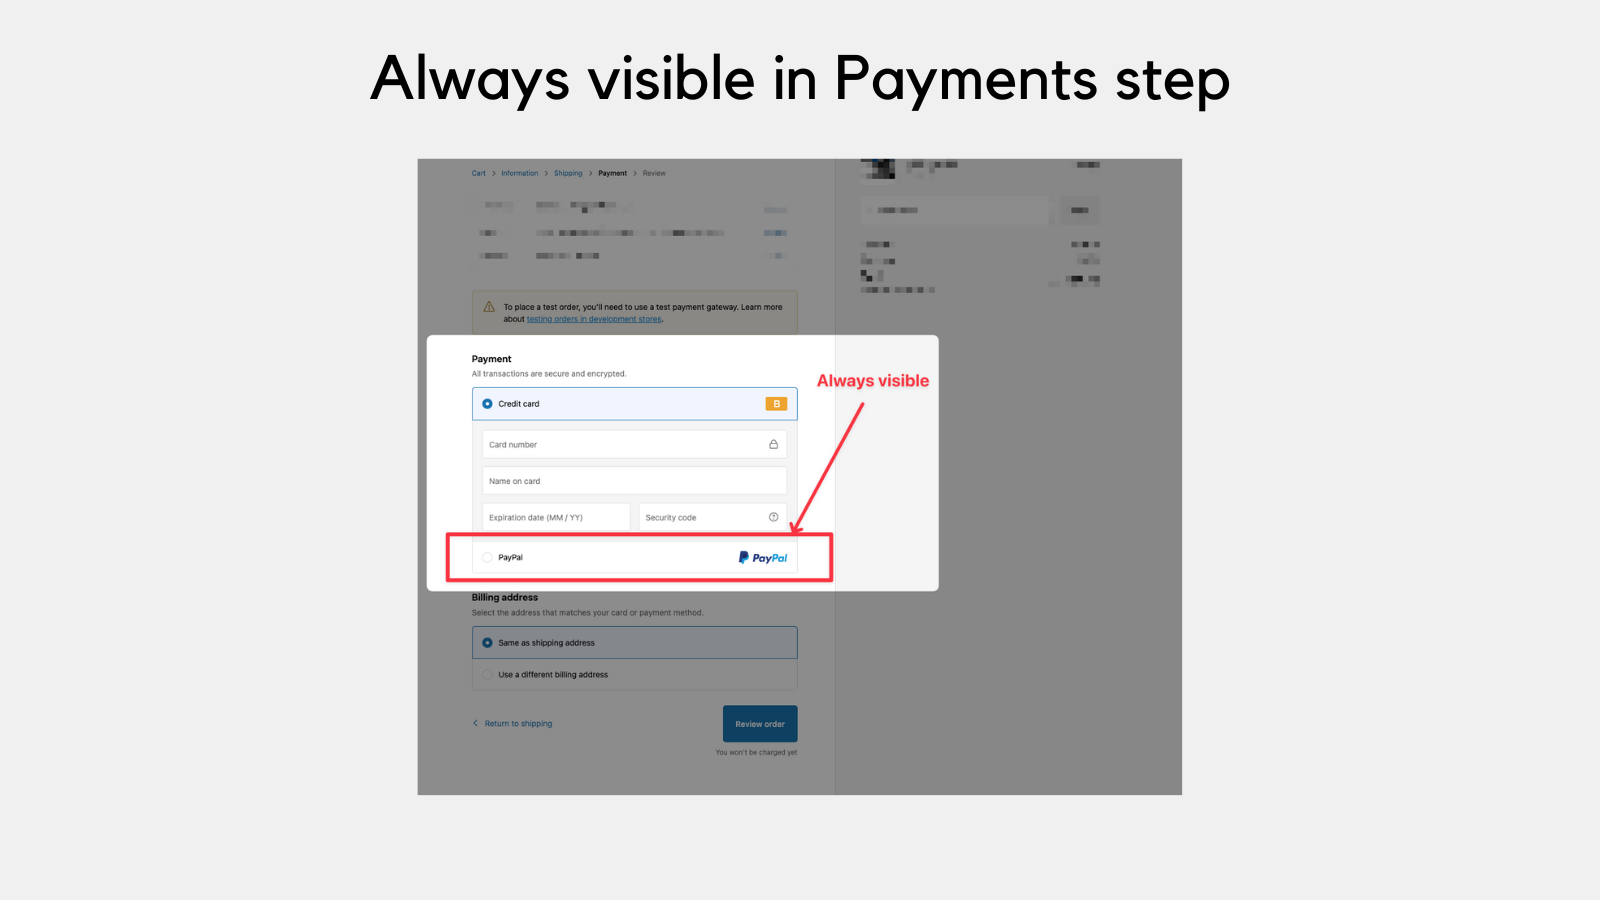 EasyHide PayPal in checkout Screenshot